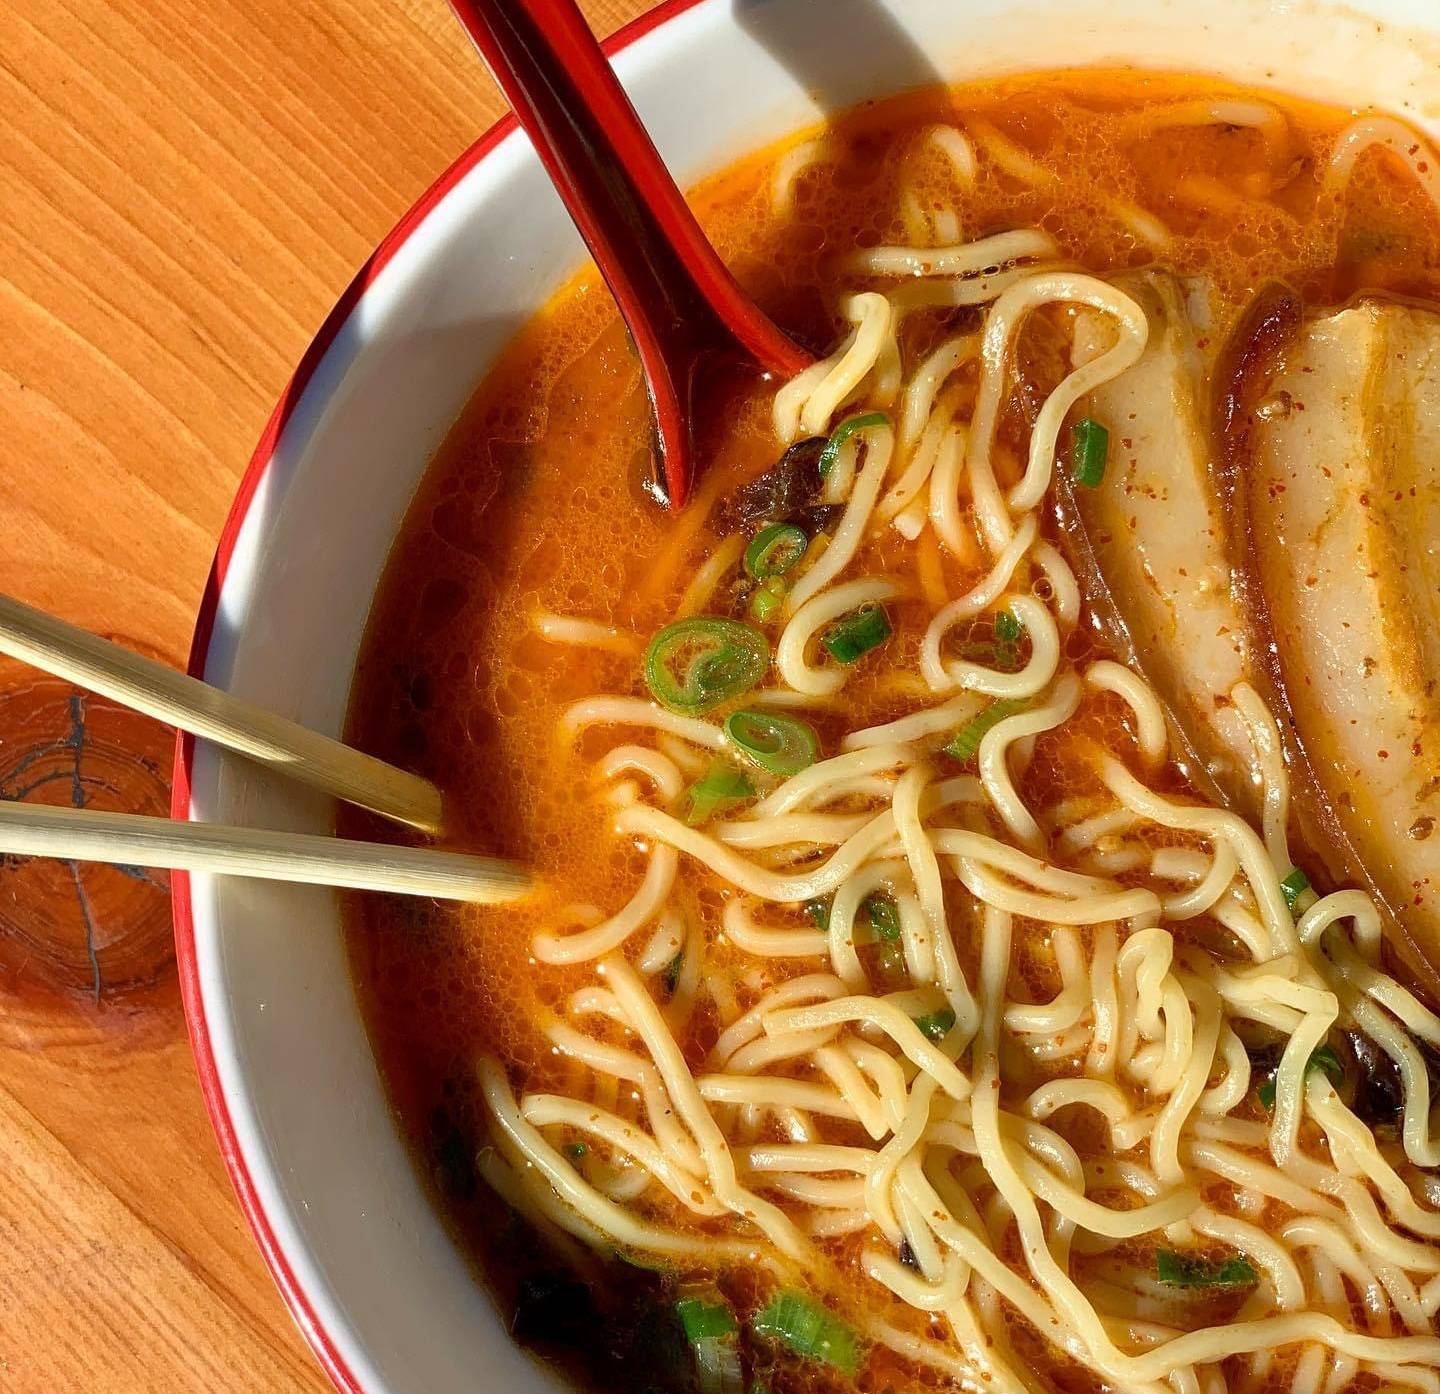 THE FEED: Noodles, Ramen, and Pho… Oh MY!